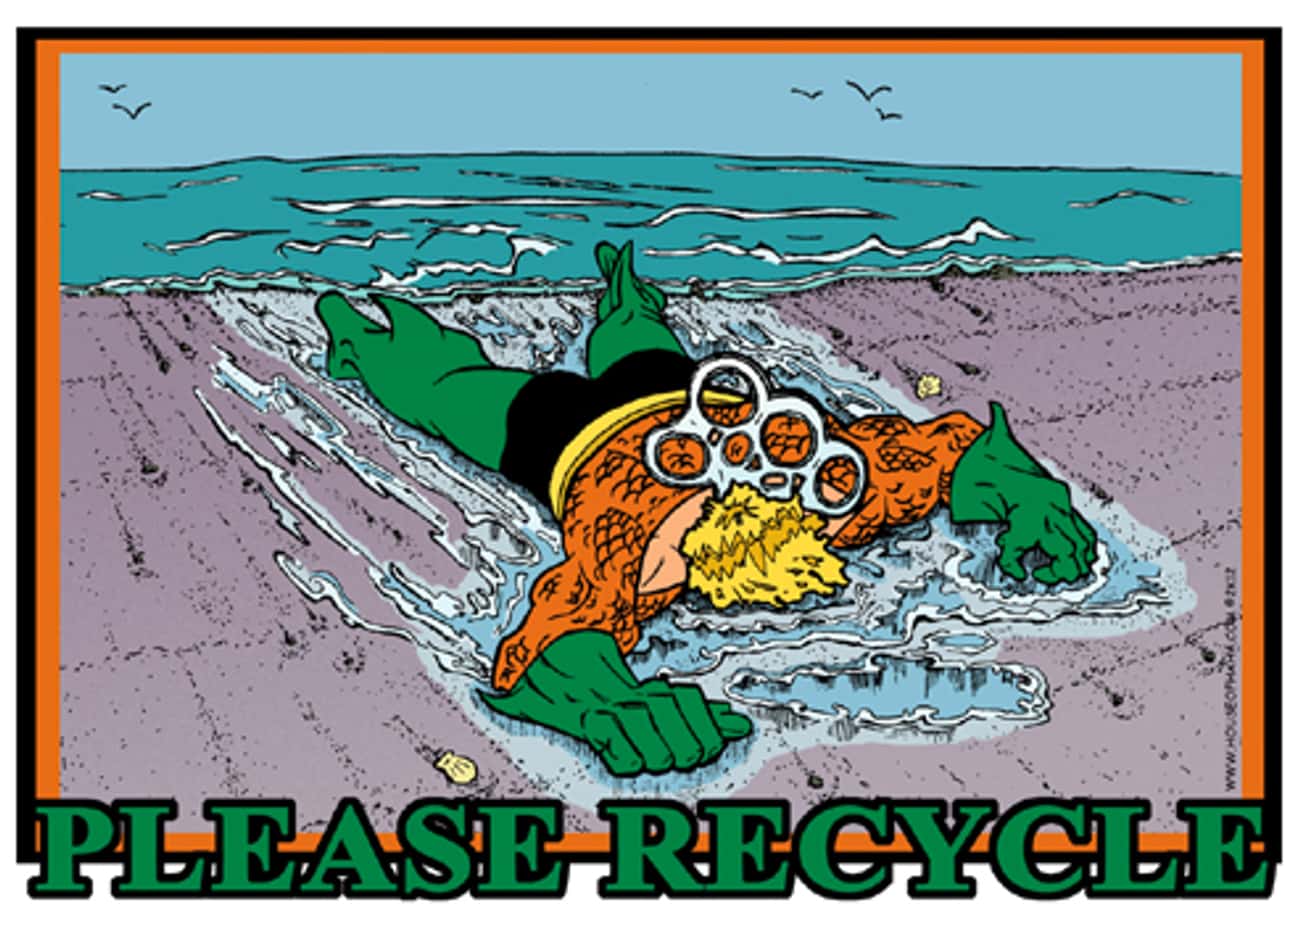 Aquaman For Recycling